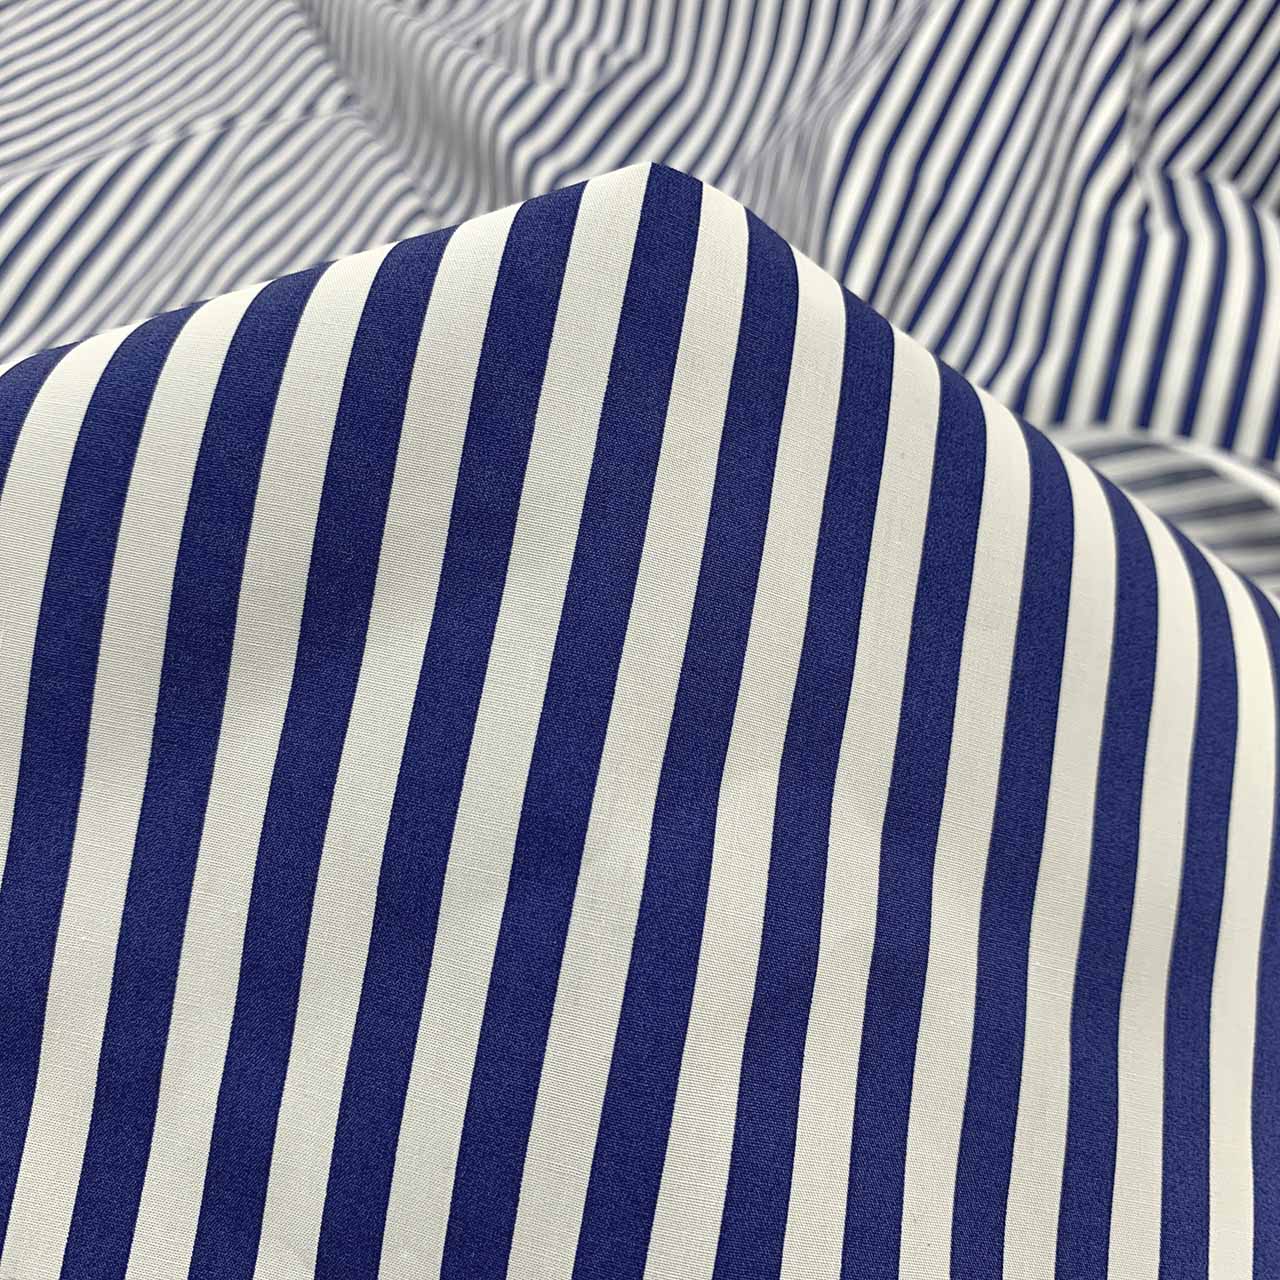 navy white stripe fabric cotton sateen fabric - Fabric Collection